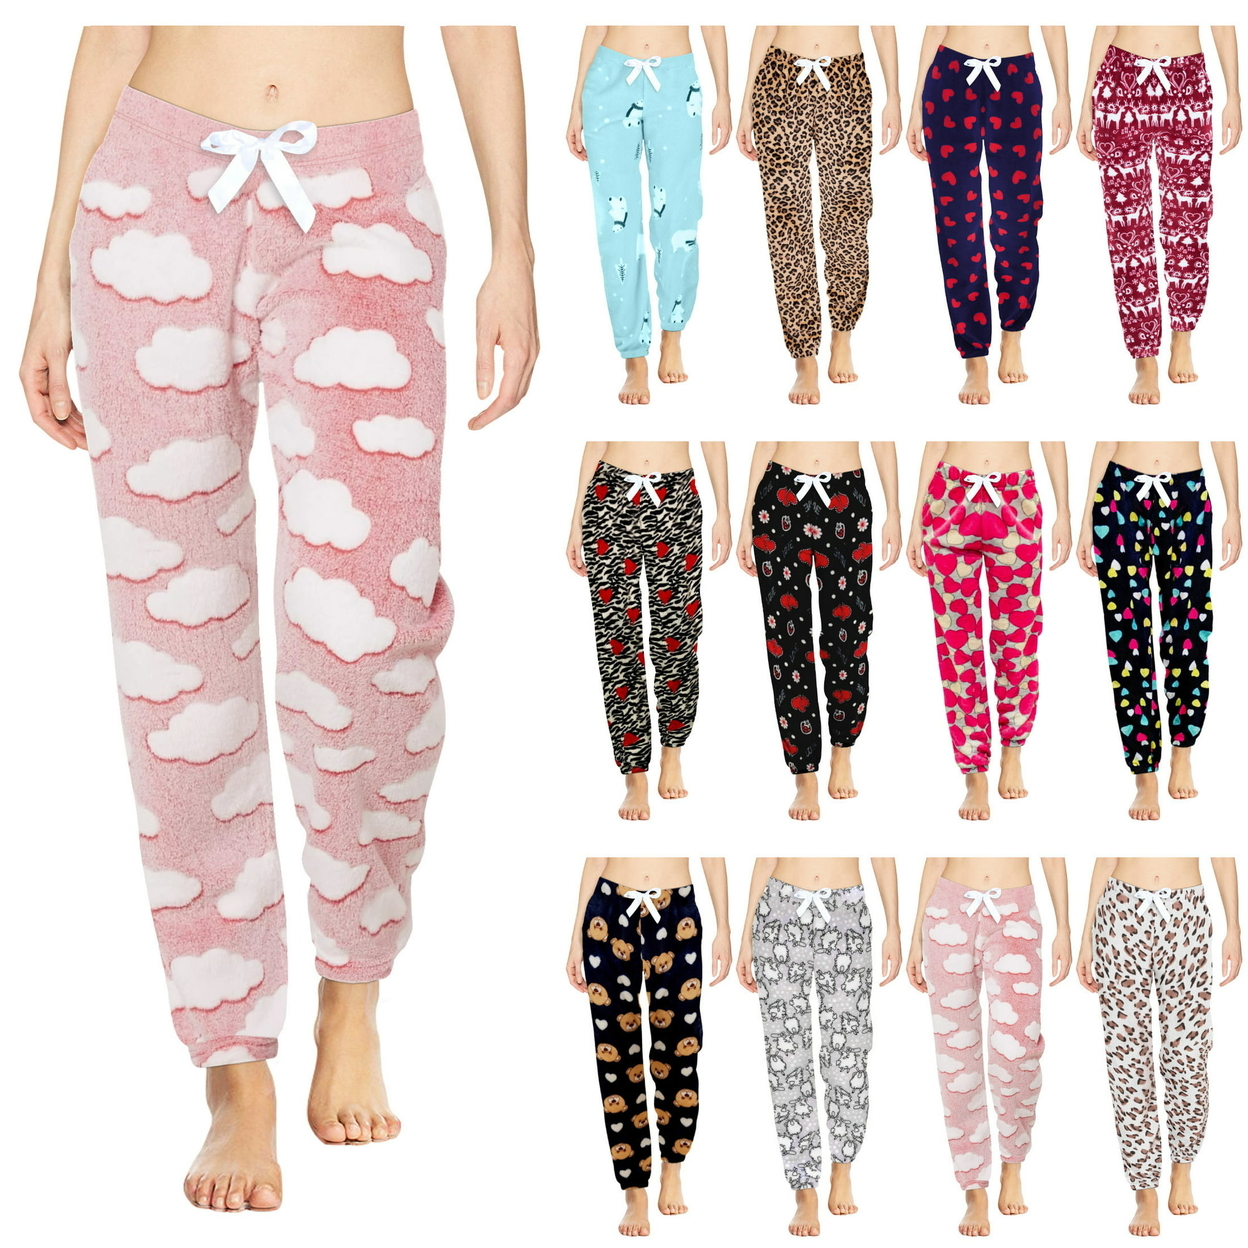 3-Pack: Women's Solid & Printed Ultra-Soft Comfy Stretch Micro-Fleece Pajama Lounge Pants - Small, Animal